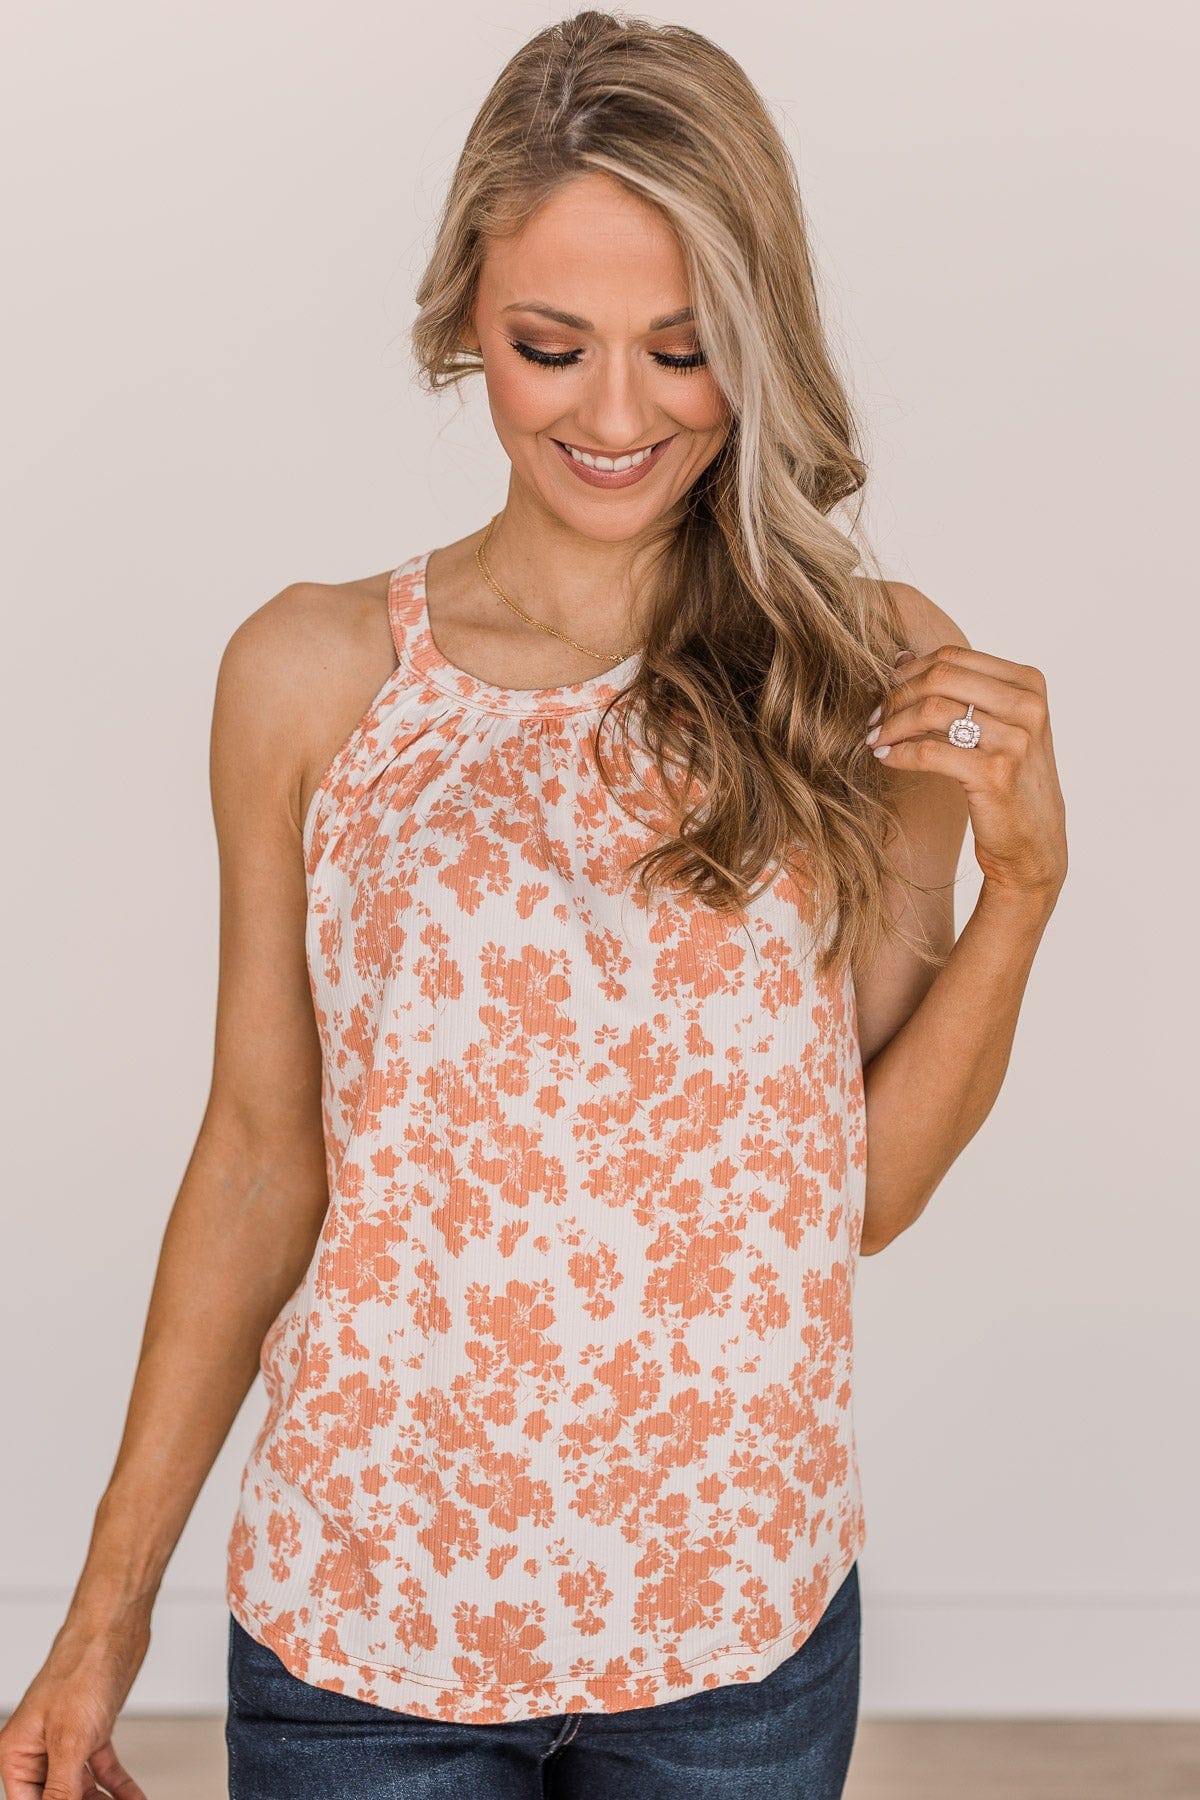 Happiest With You Floral Tank Top- Ivory & Salmon Pink